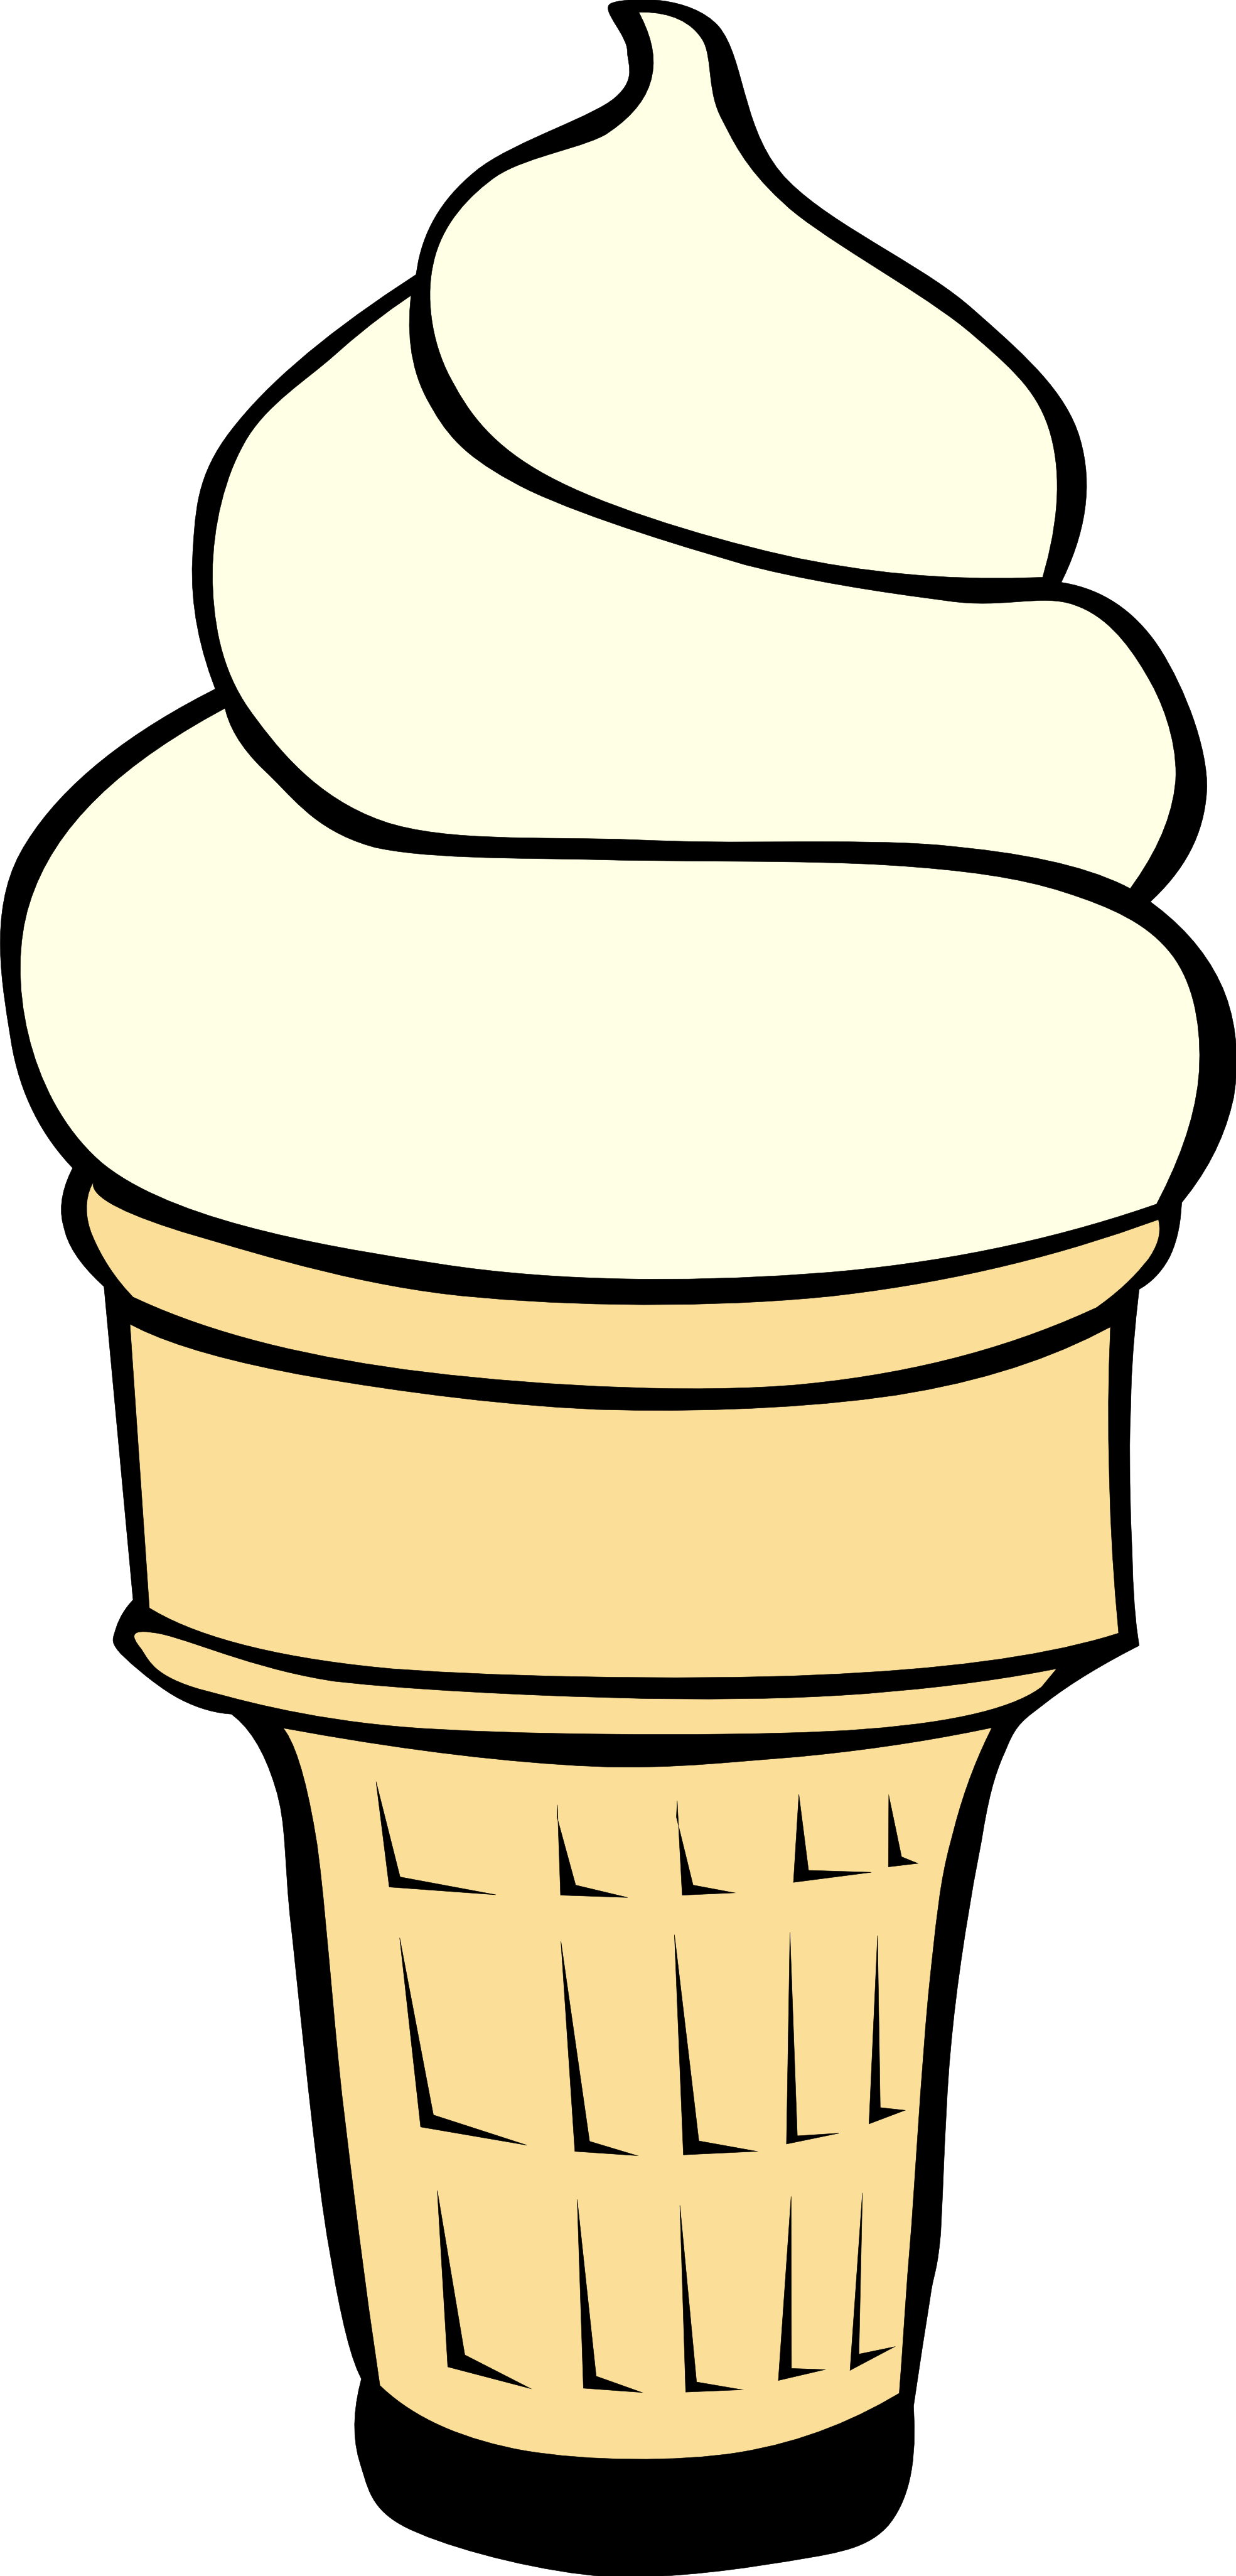 Ice Cream Clip Art Chocolate Vanilla Strawberry Sprinkles - Vanilla Ice Cream Cone Clip Art Png Transparent Png (1969x4103), Png Download